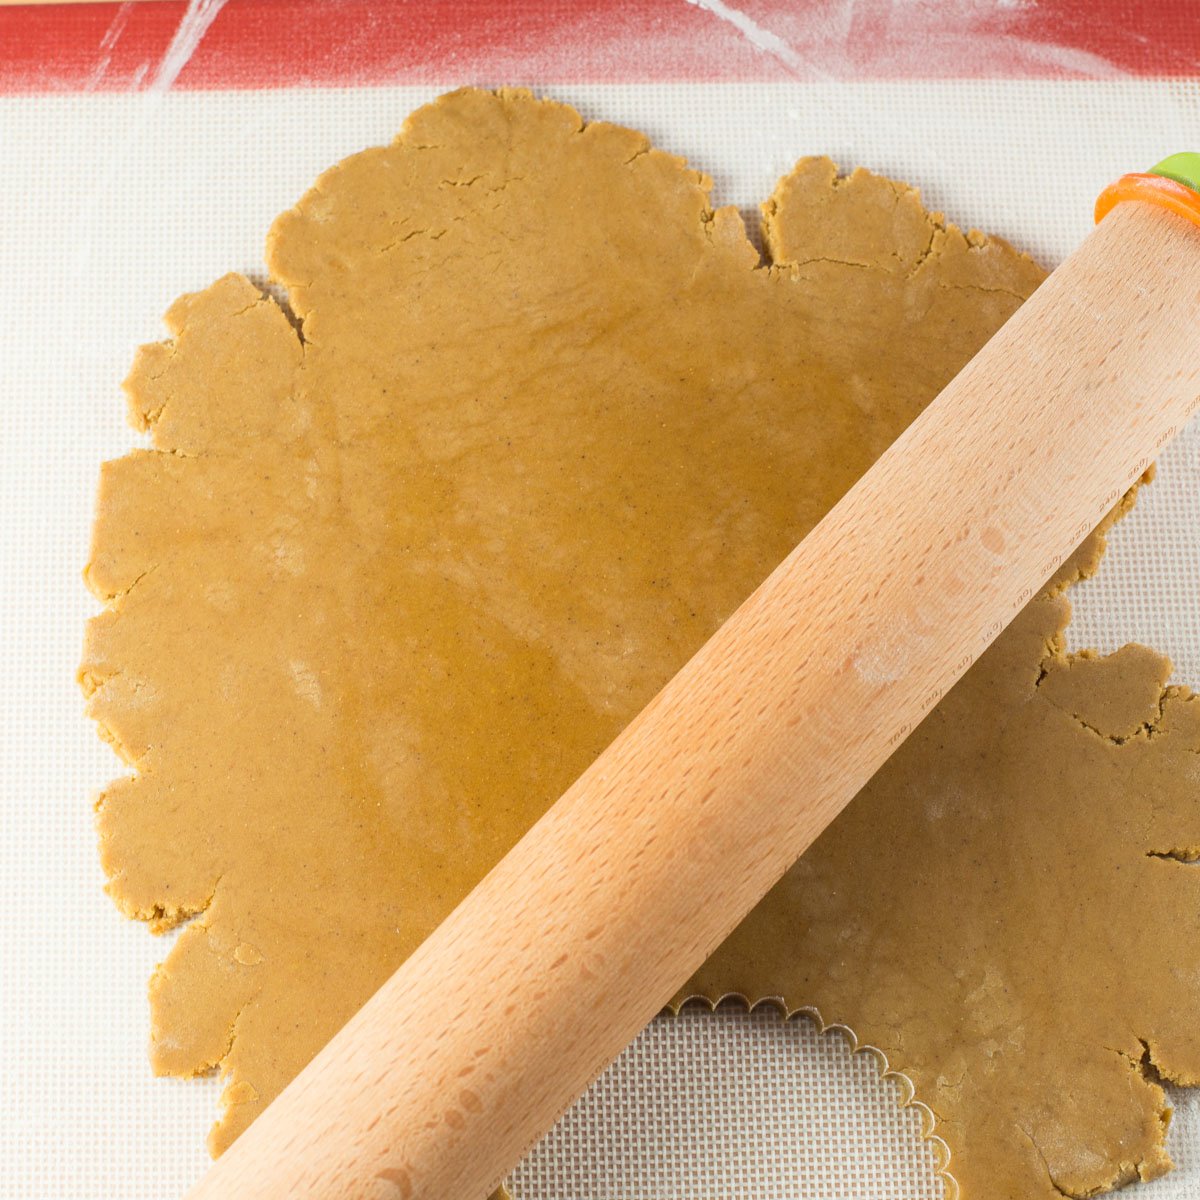 Gingerbread dough rolled out with wood rolling pin.